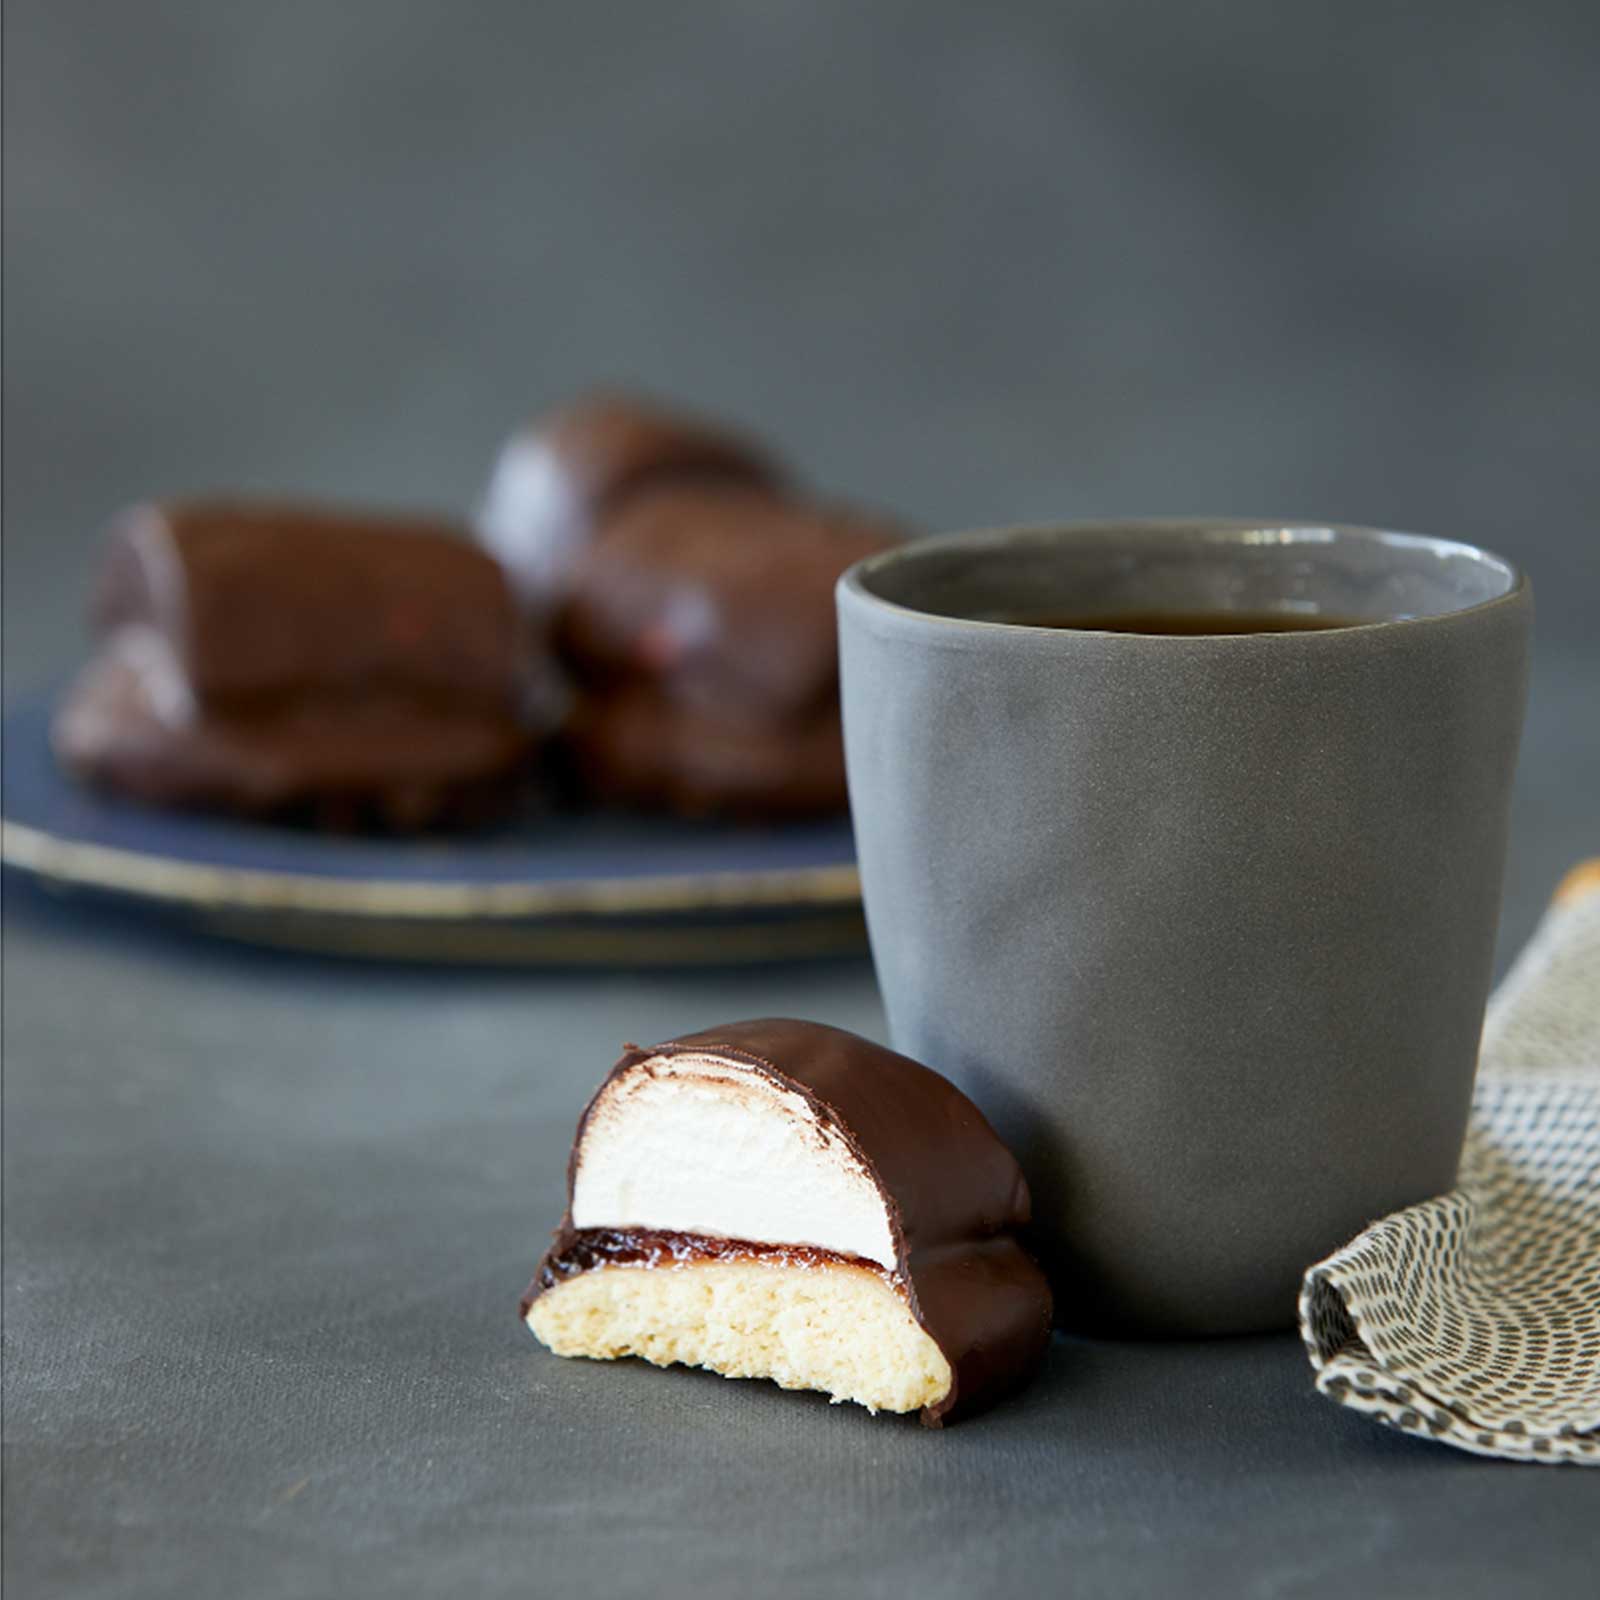 Half a gluten-free chocolate royal biscuit sits in front of a fine ceramic grey mug. Behind the mug is a grey plate with more choc-royals waiting to be served.